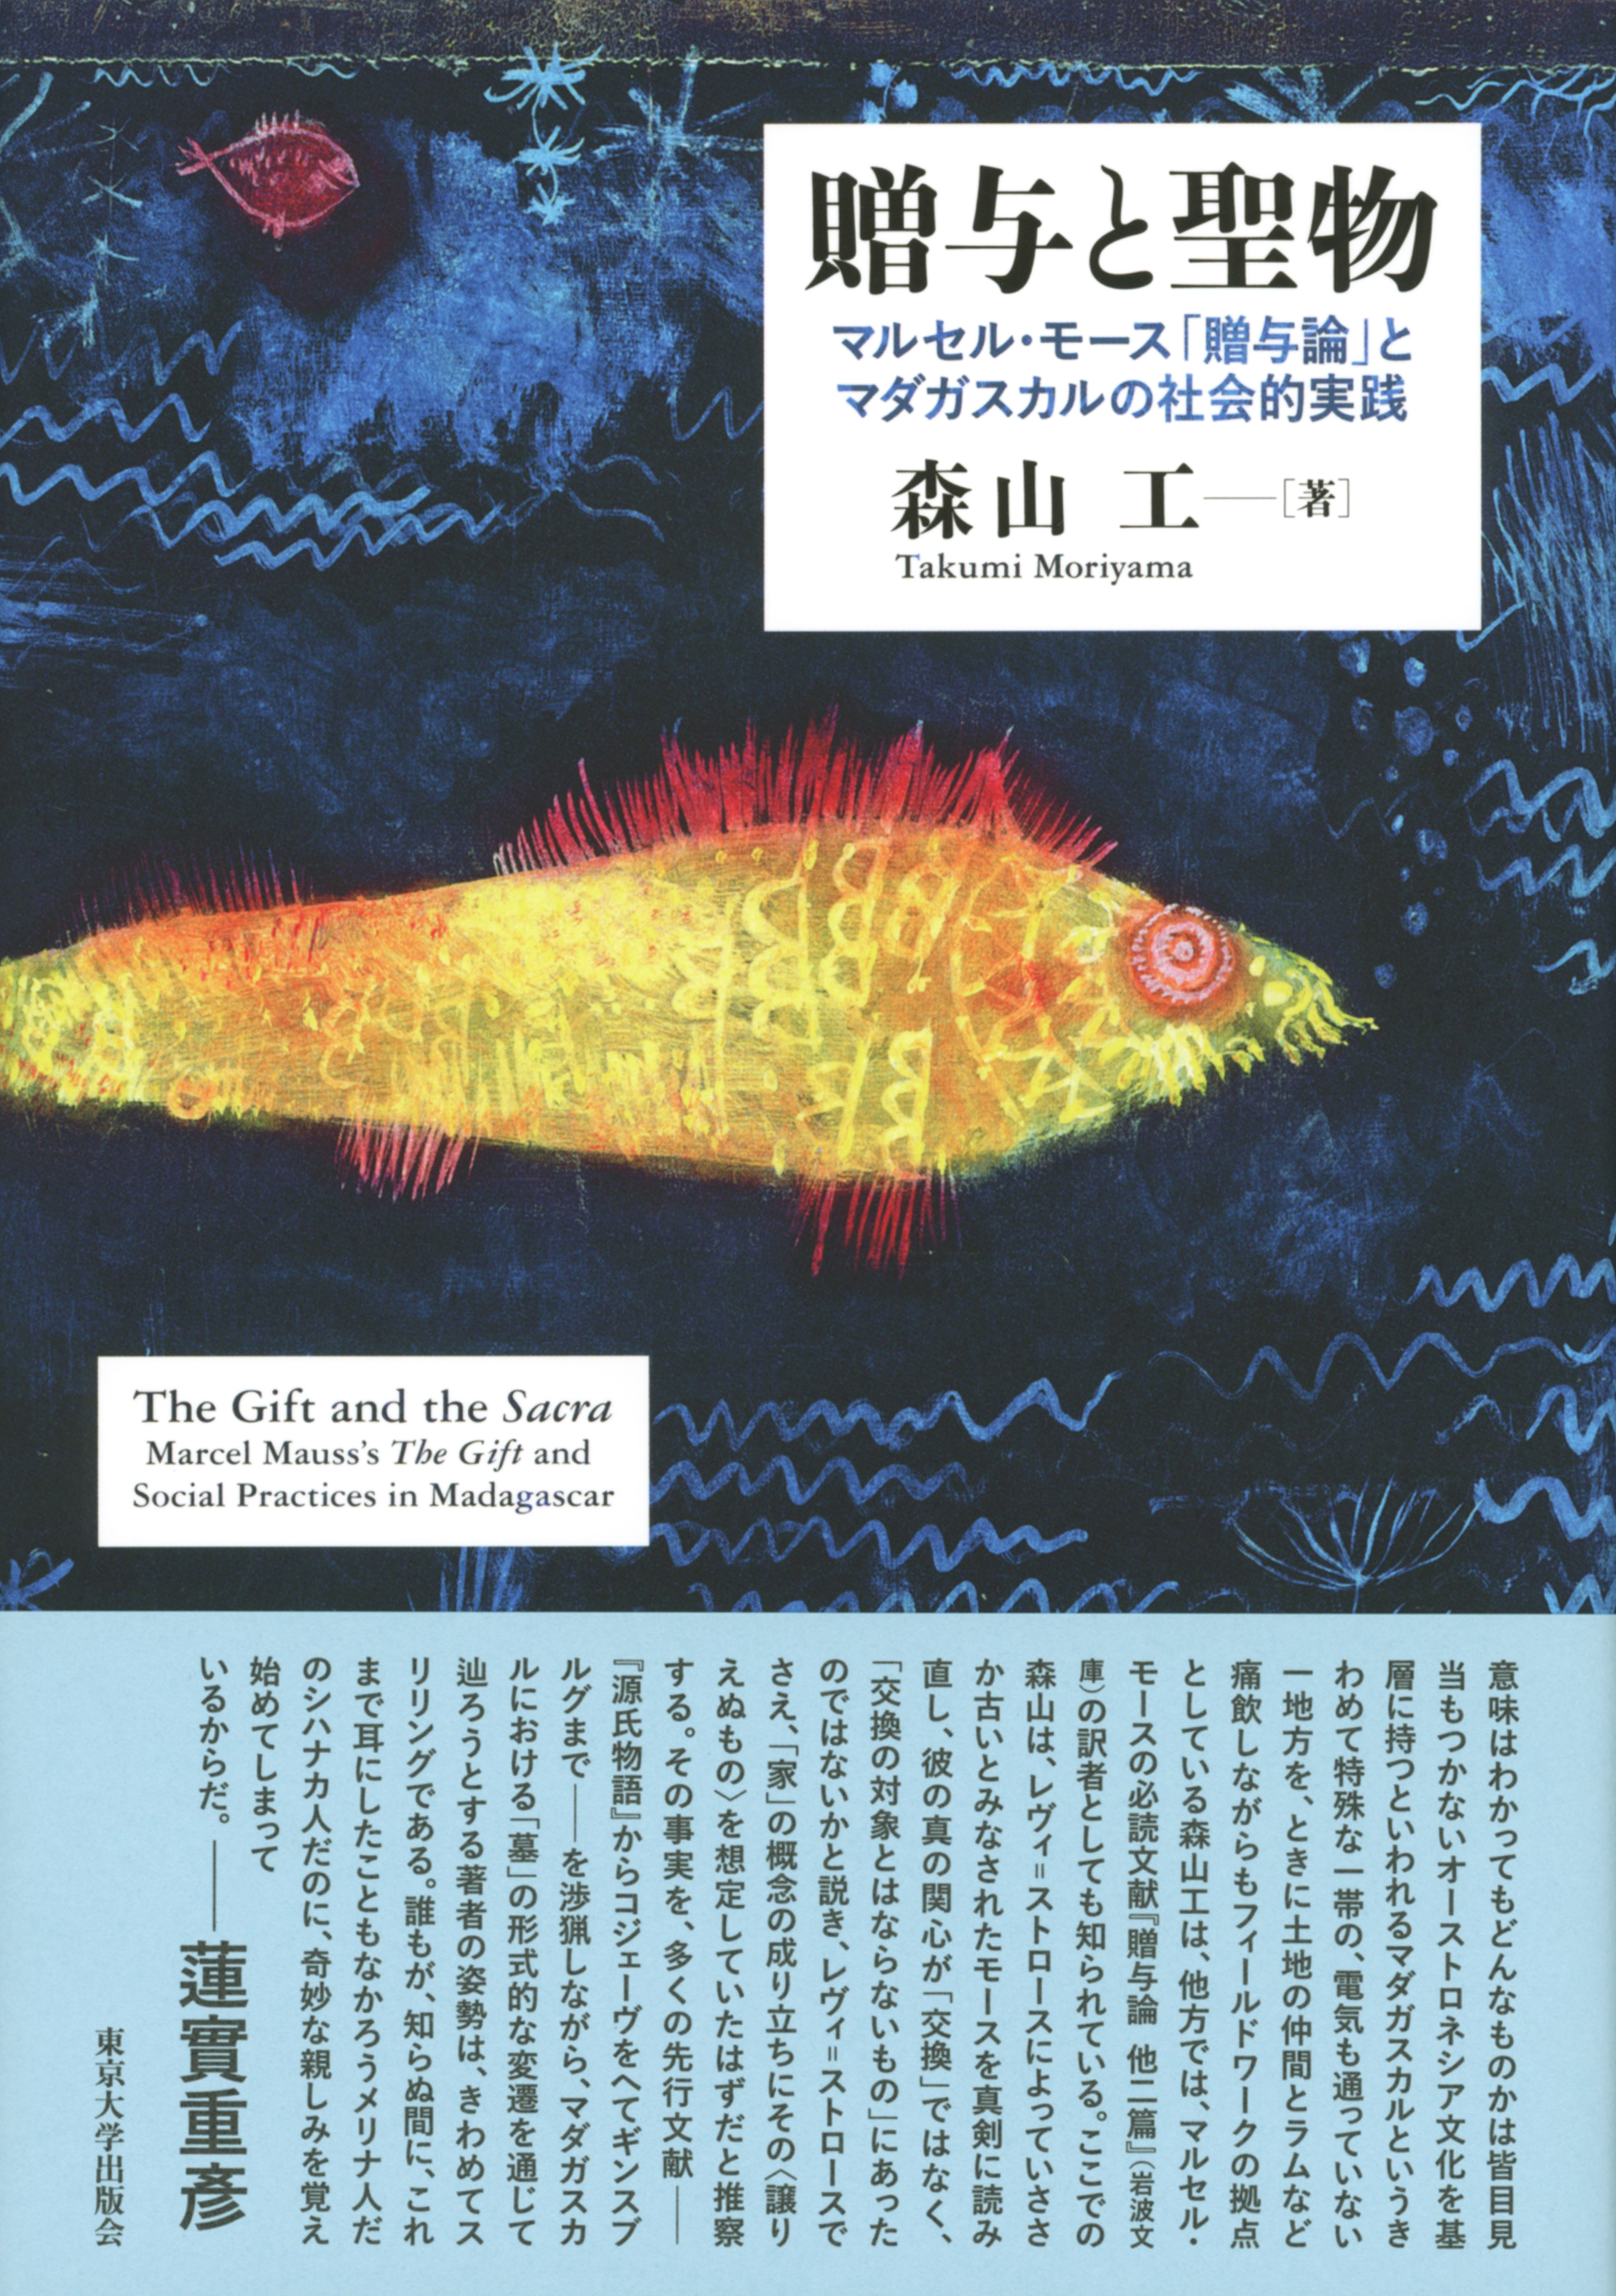 a picture of Der Goldfisch painted by Pau Klee